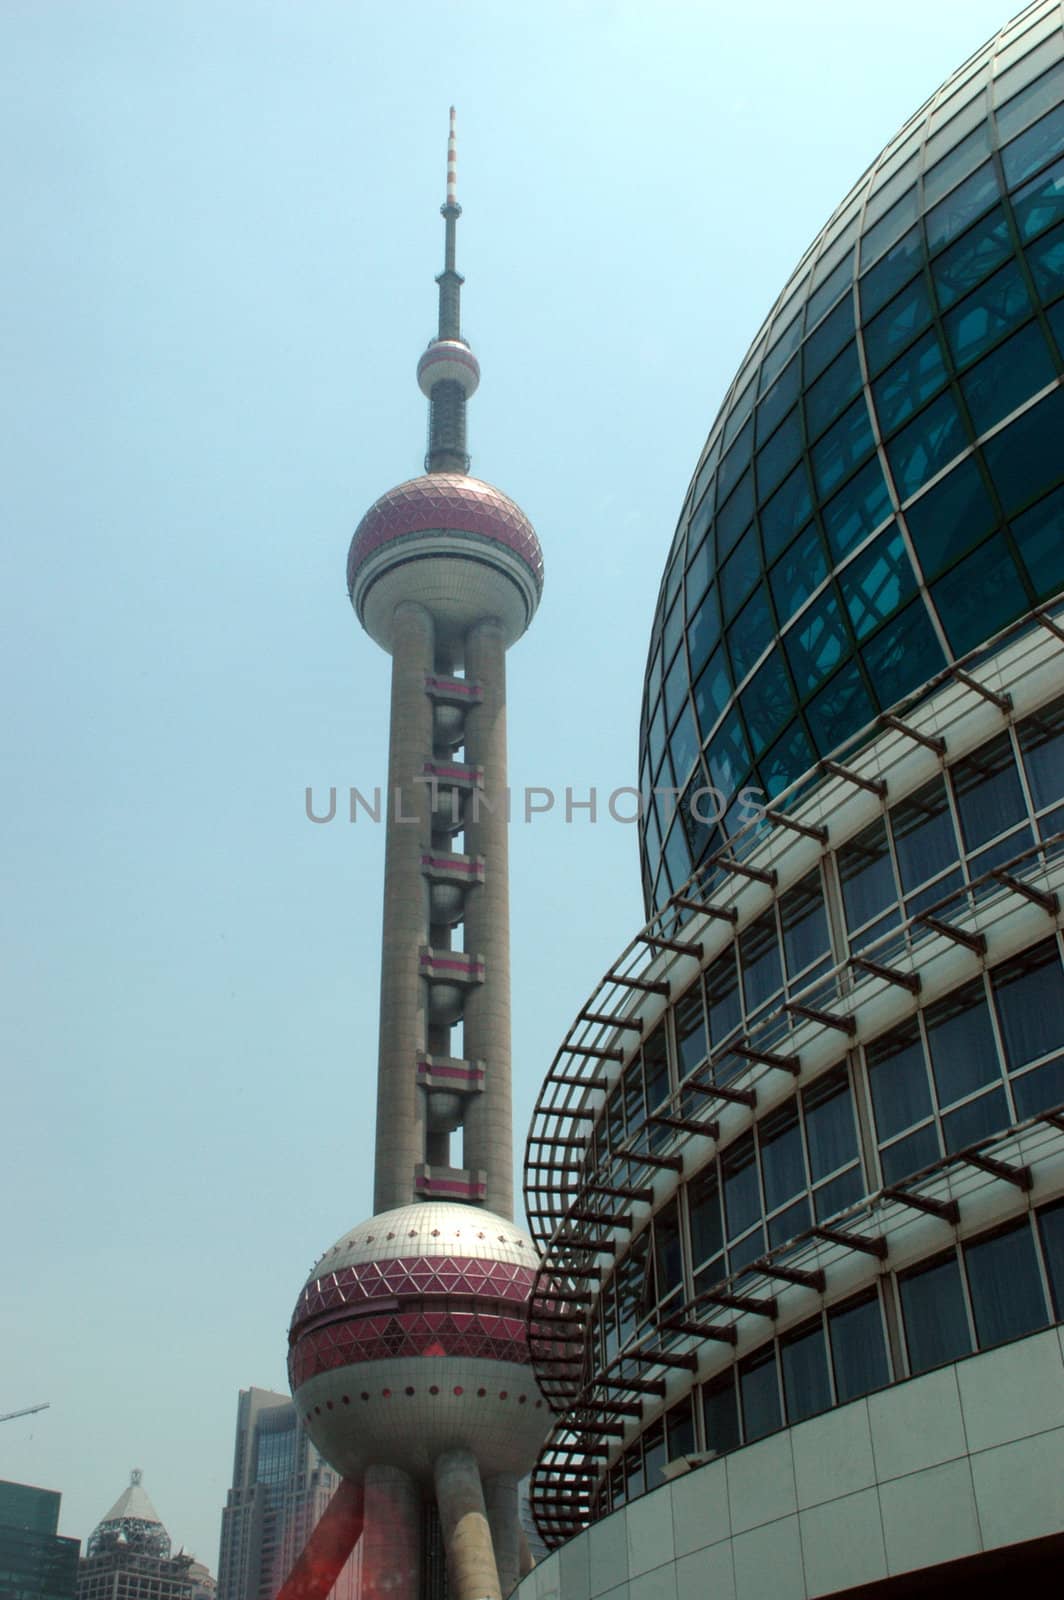 China, Shanghai city. Classic building together with Orient Pearl TV tower.